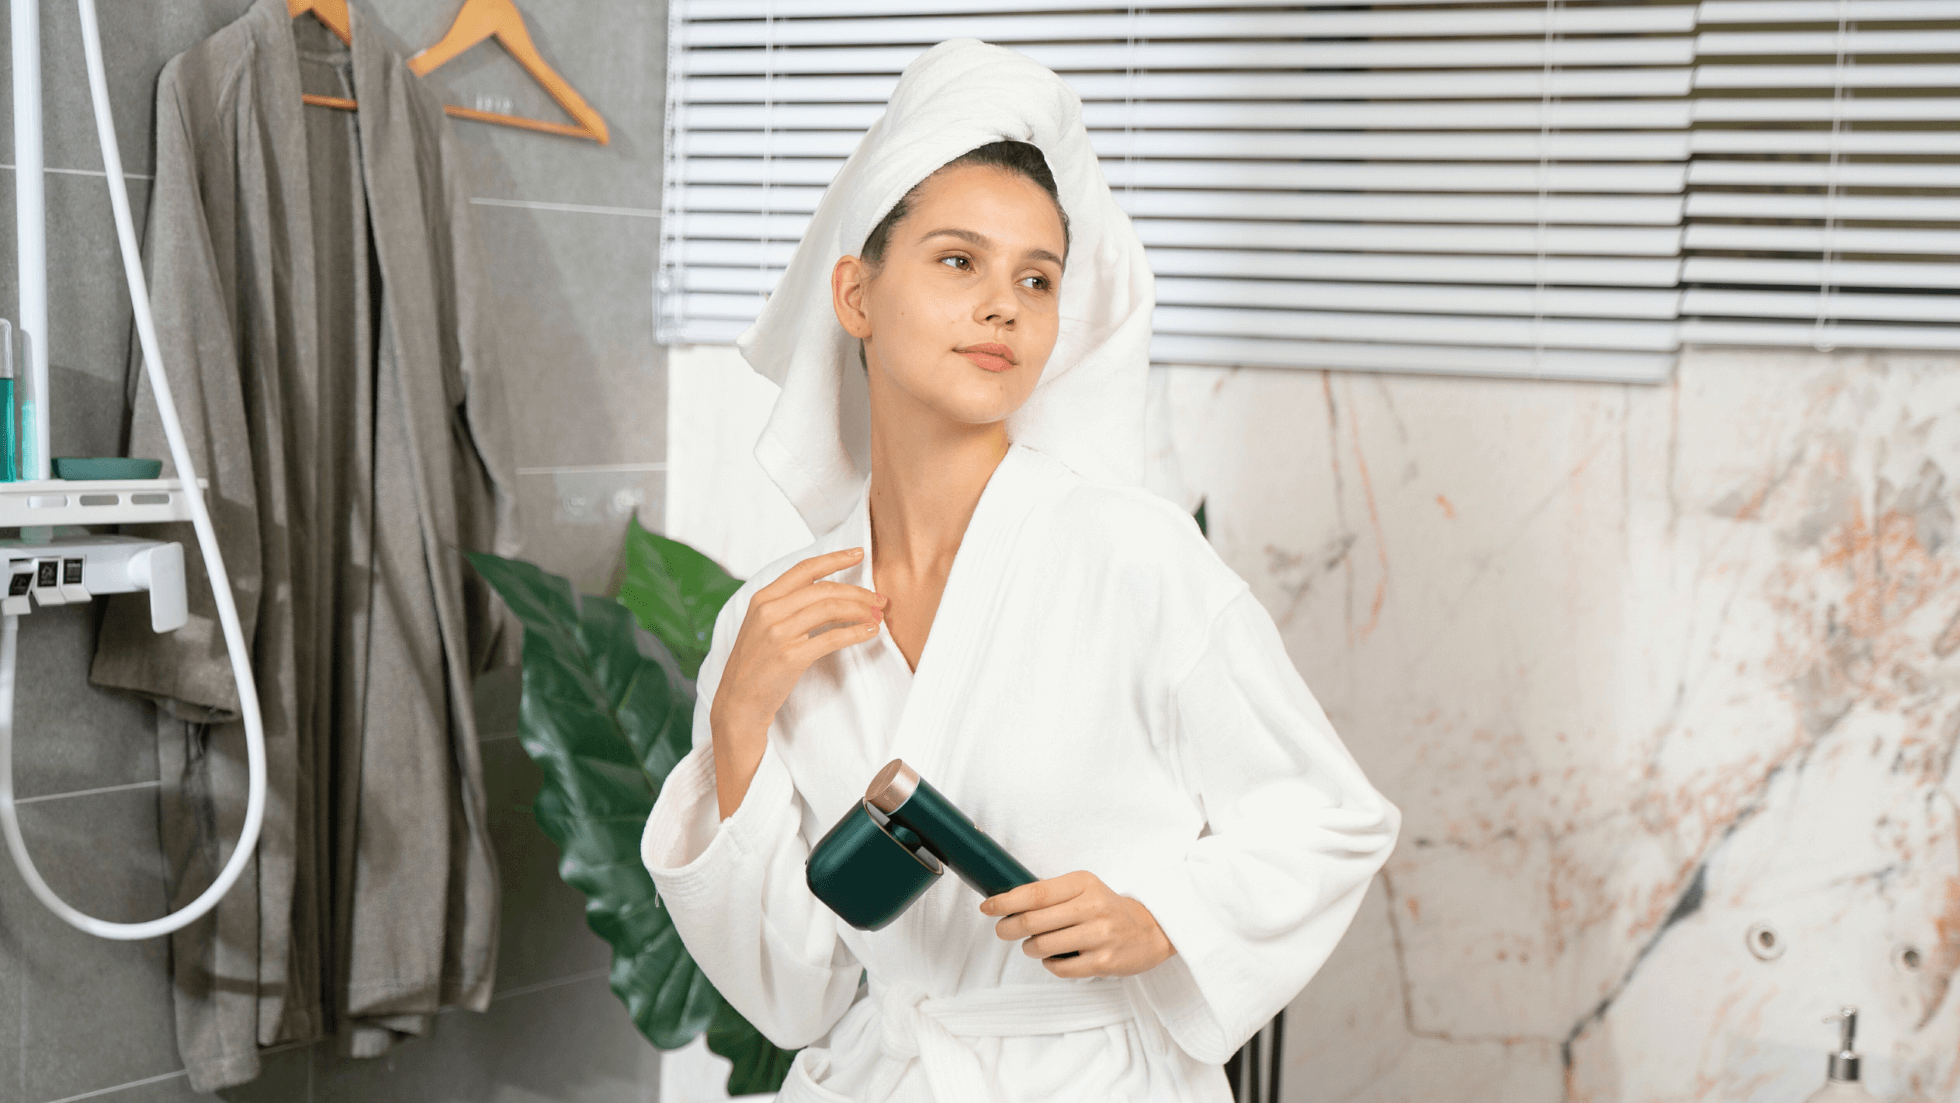 Woman in white bathrobe holding an IPL hair removal device in a modern bathroom setting.